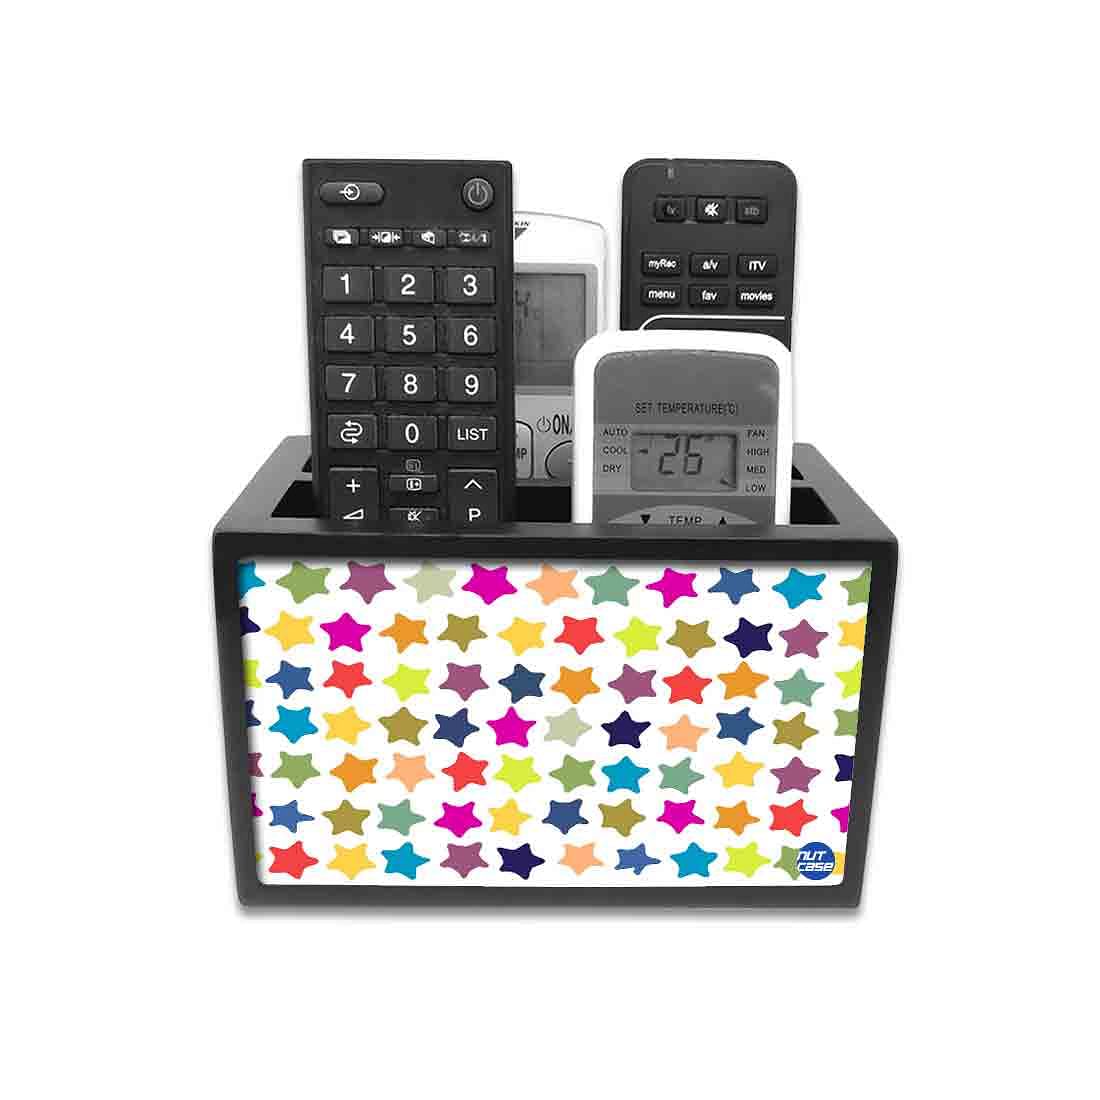 Remote Control Stand Holder Organizer For TV / AC Remotes -  Colorful Stars Nutcase